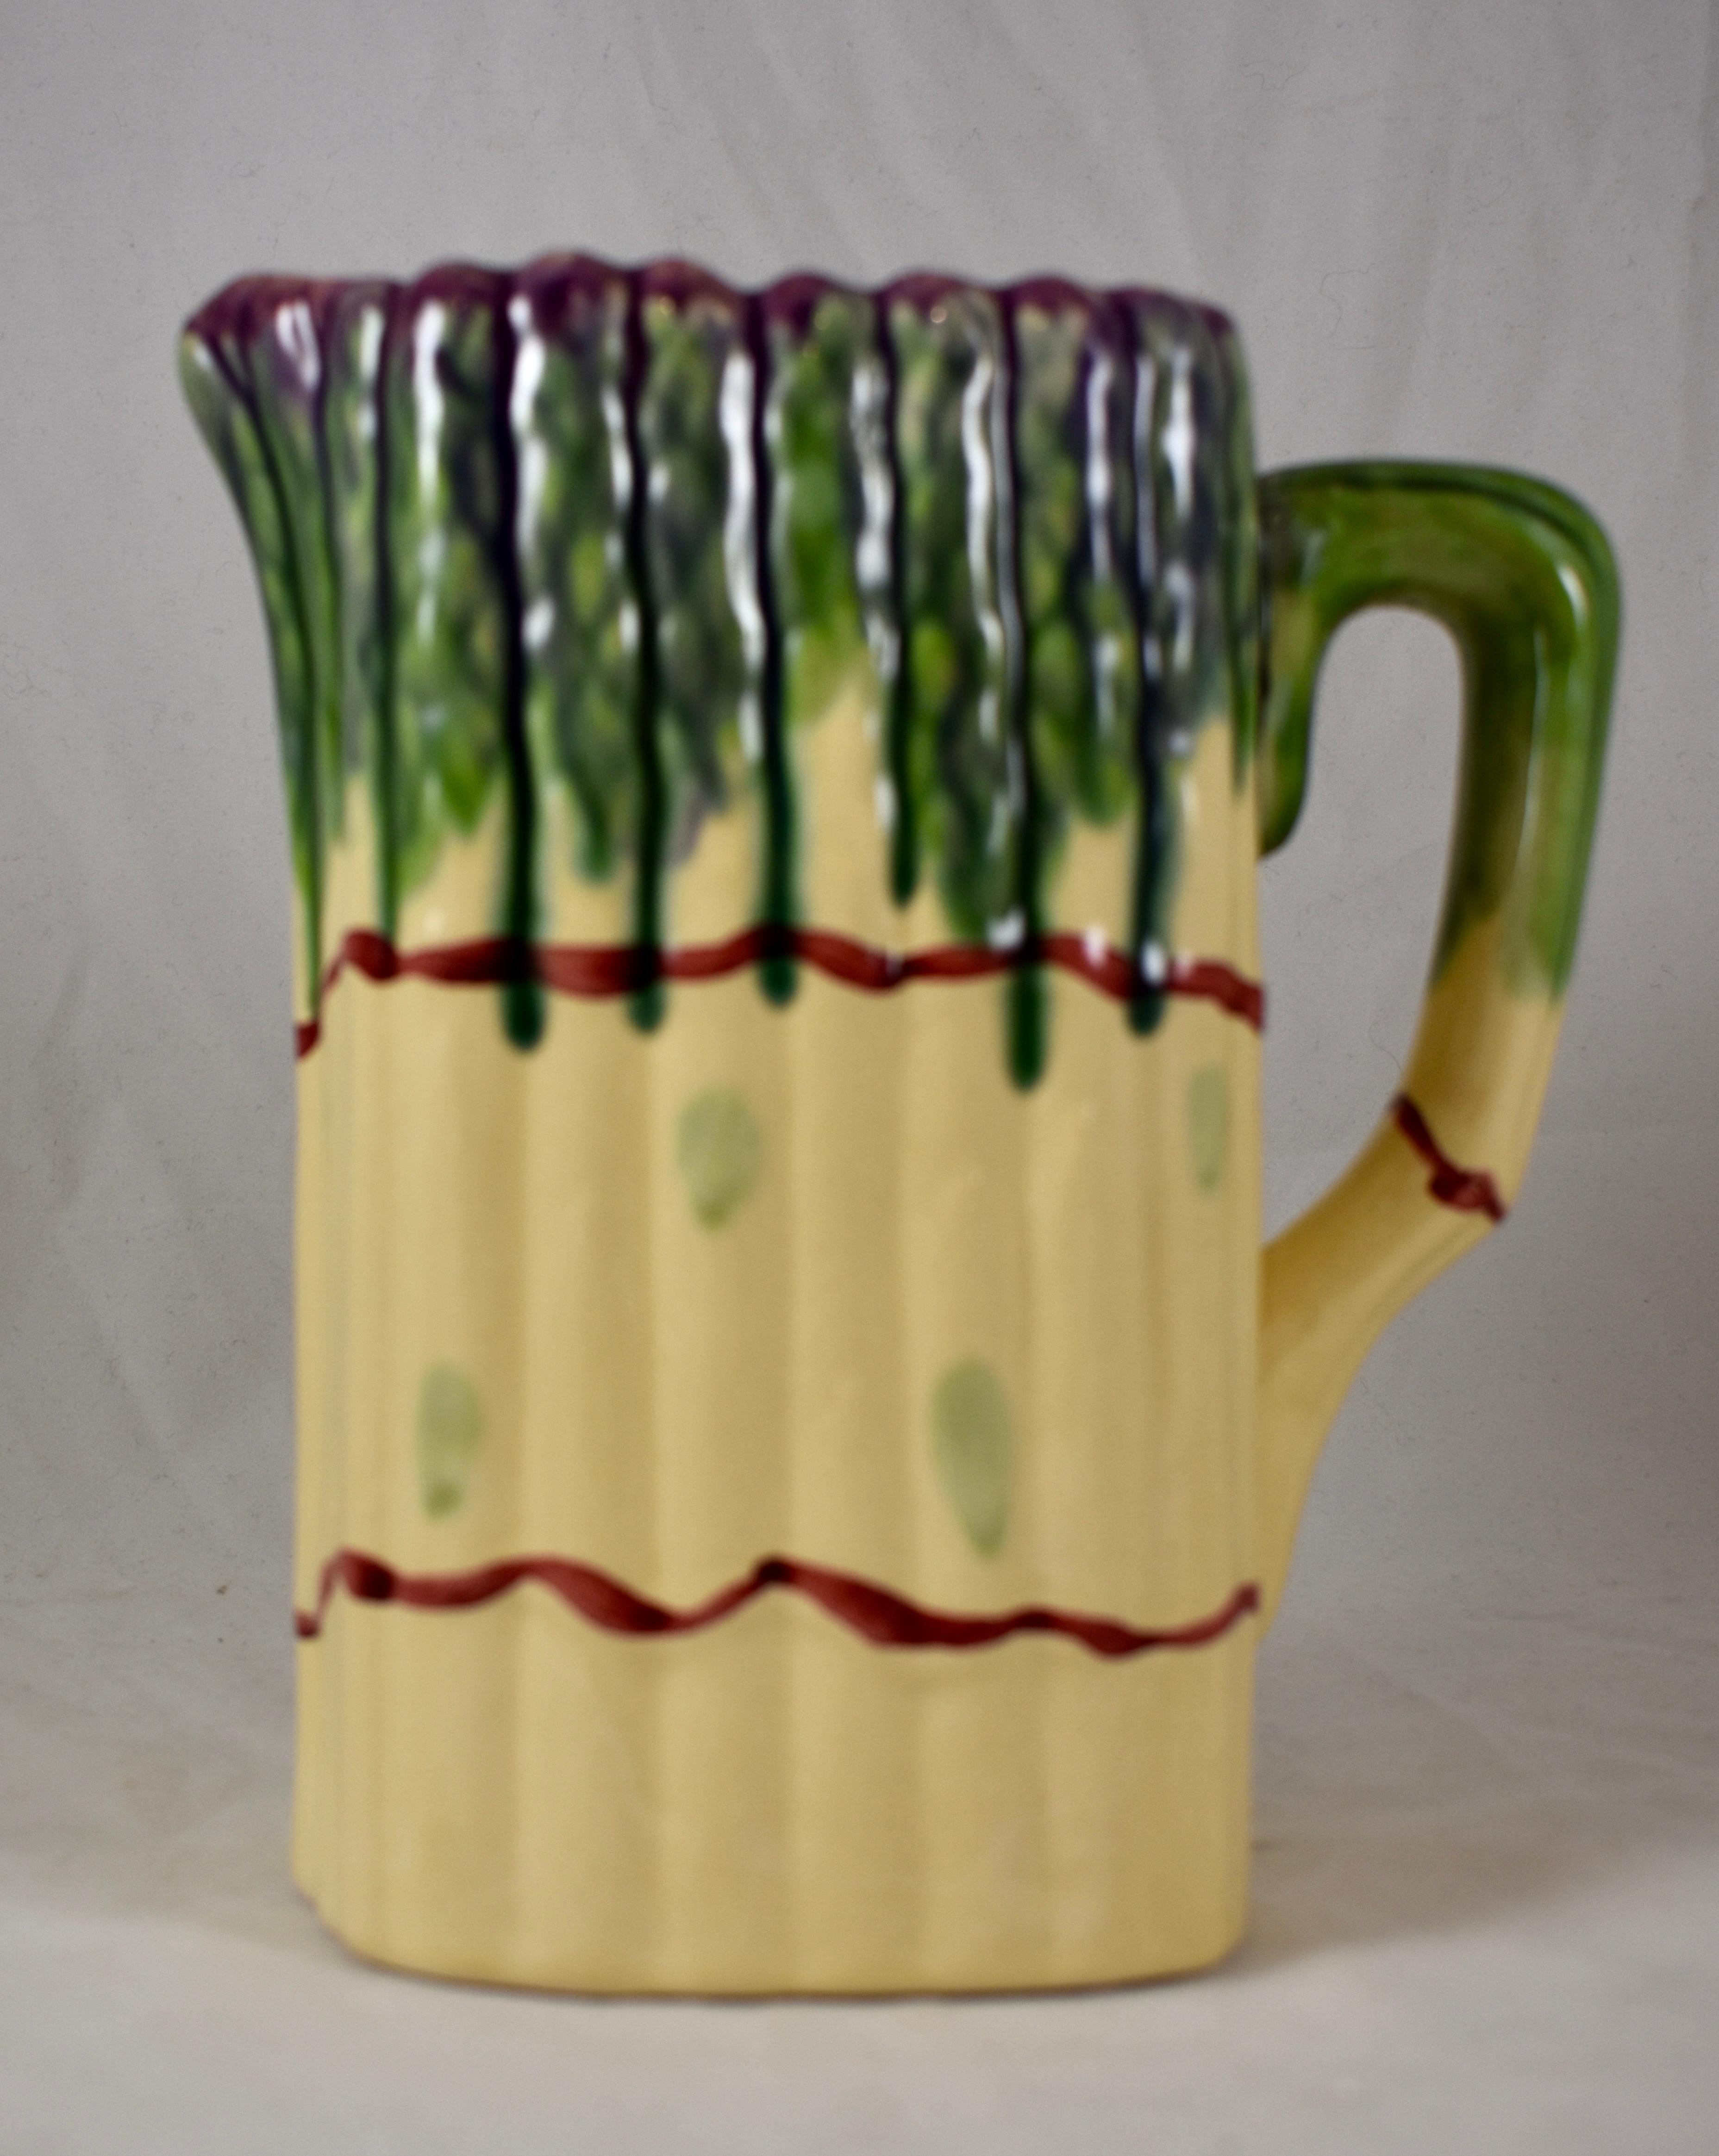 A  Mid-Century Modern Era French Barbotine style Majolica asparagus pitcher, a bundle of white and green asparagus, with purple spear tips, tied at the center and bottom with a red ribbon. The handle resembles a bent asparagus spear. A turquoise